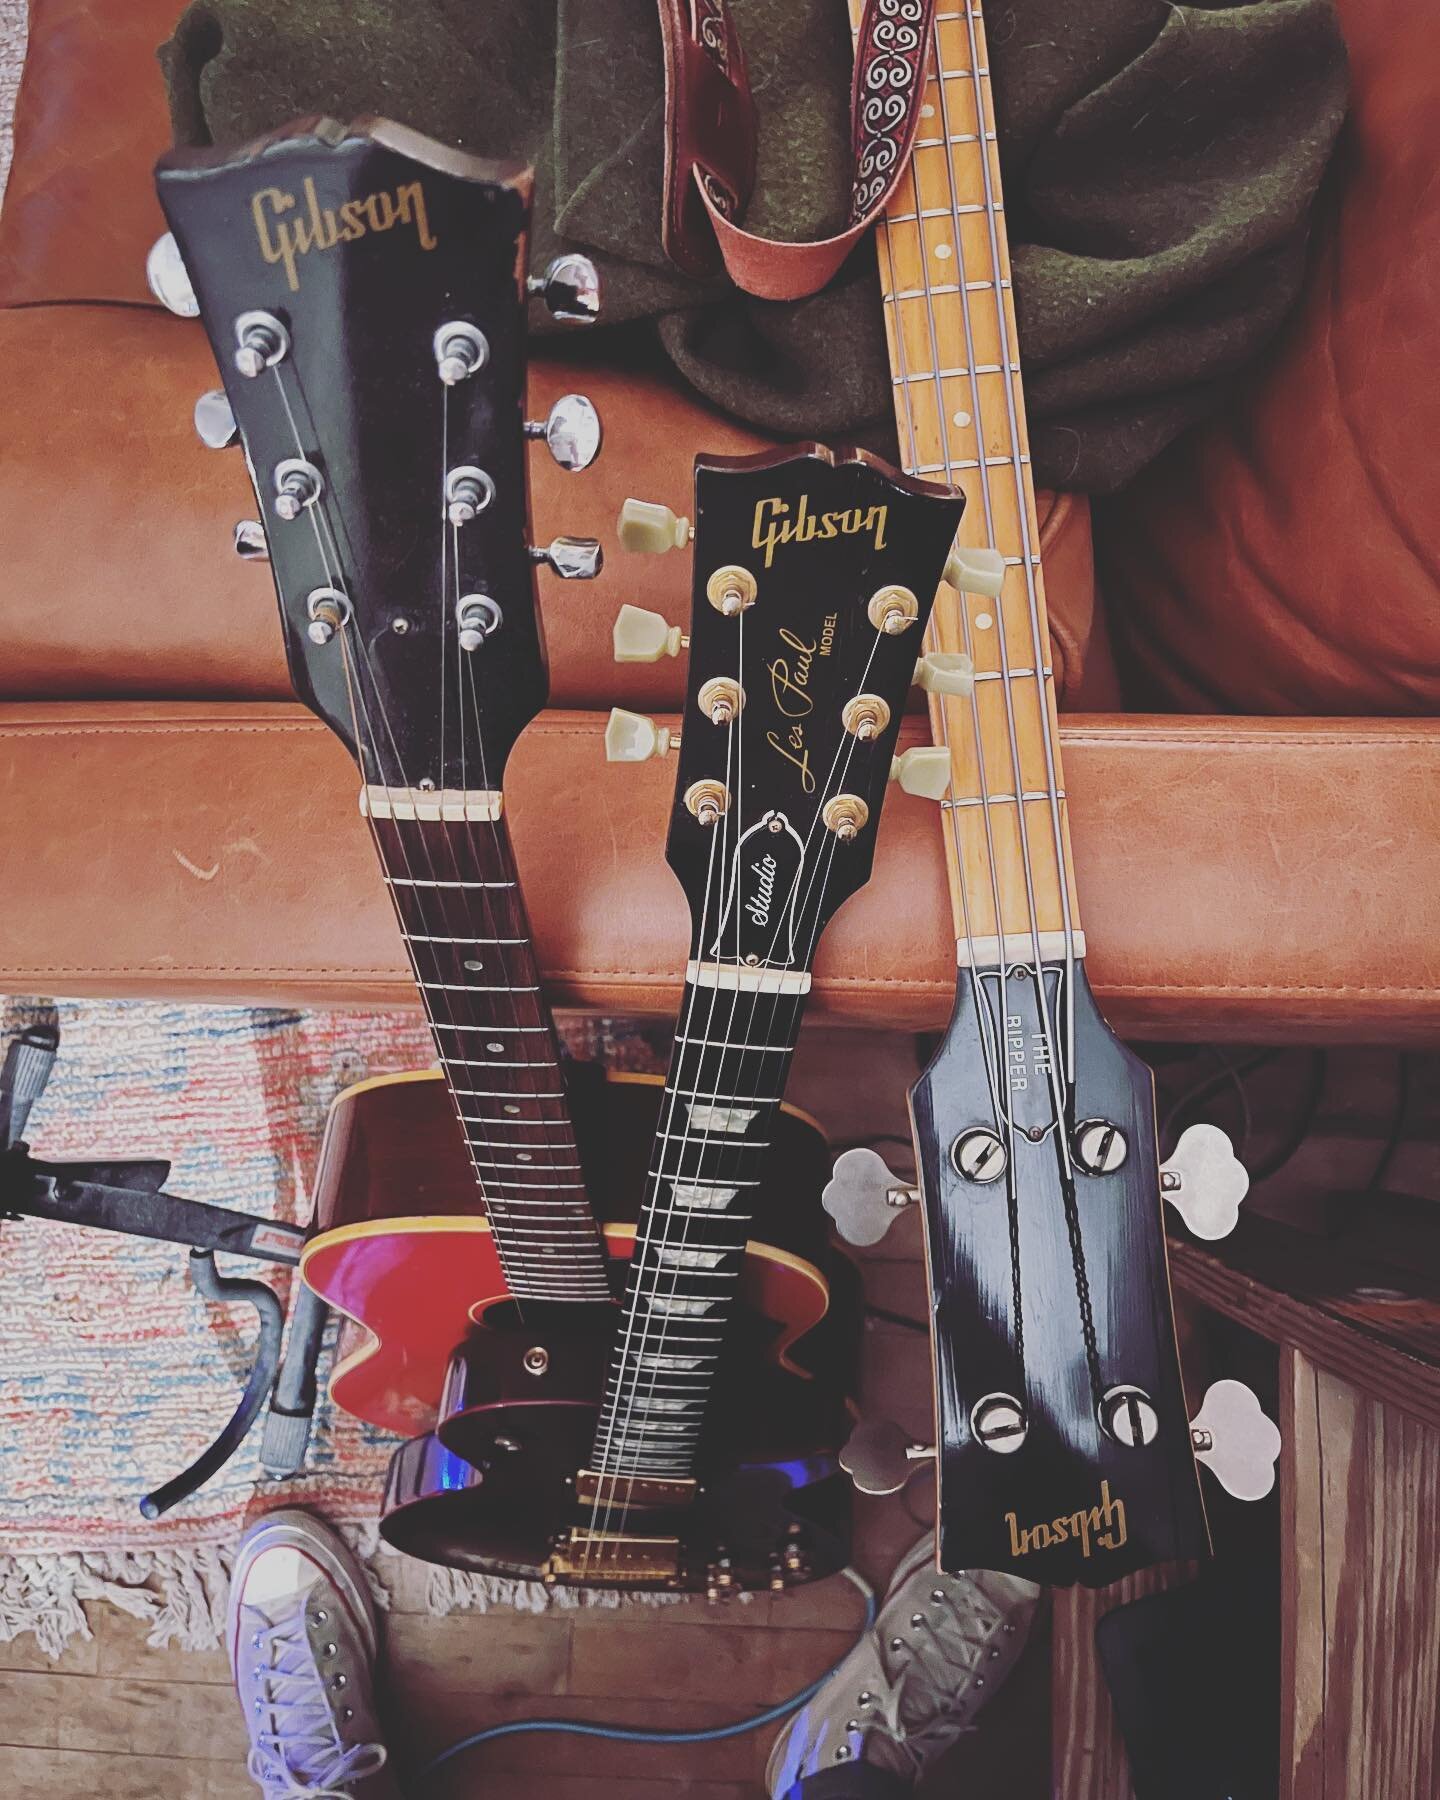 The most iconic headstock. No better feeling than playing, and looking down the neck as you jam along and see the Gibson logo. And only in those times do I forgive you for putting two of the four tuners on my Ripper backwards.  #gibsonguitars #gibson